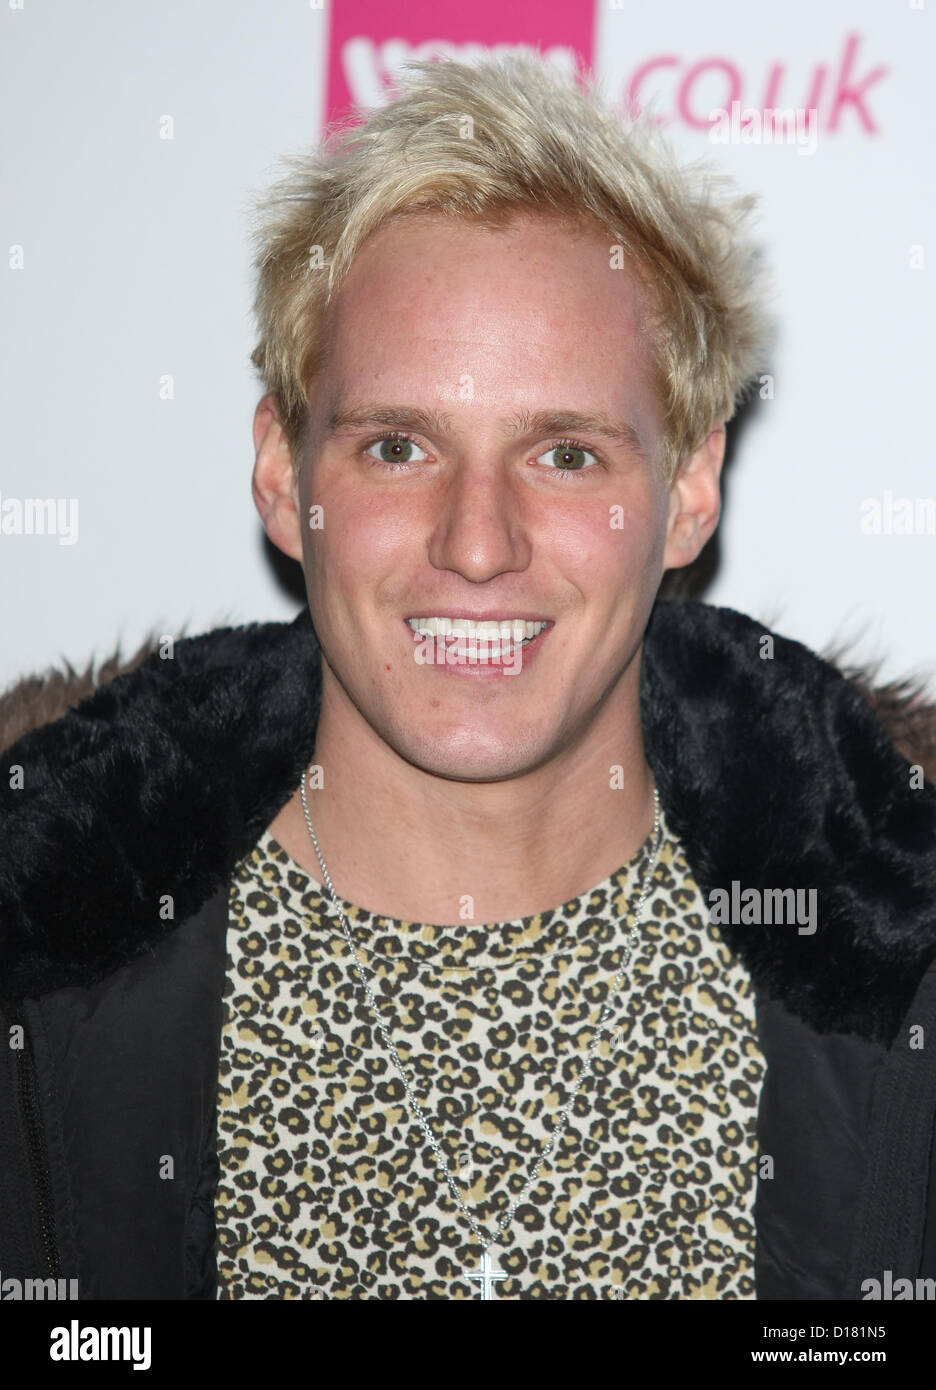 JAMIE LAING VERY.CO.UK ONLINE RETAILER HOSTS THE UK'S FIRST CATWALK SHOW ON ICE FEATURING PROFESSIONAL SKATERS WEARING VERY.CO.U Stock Photo